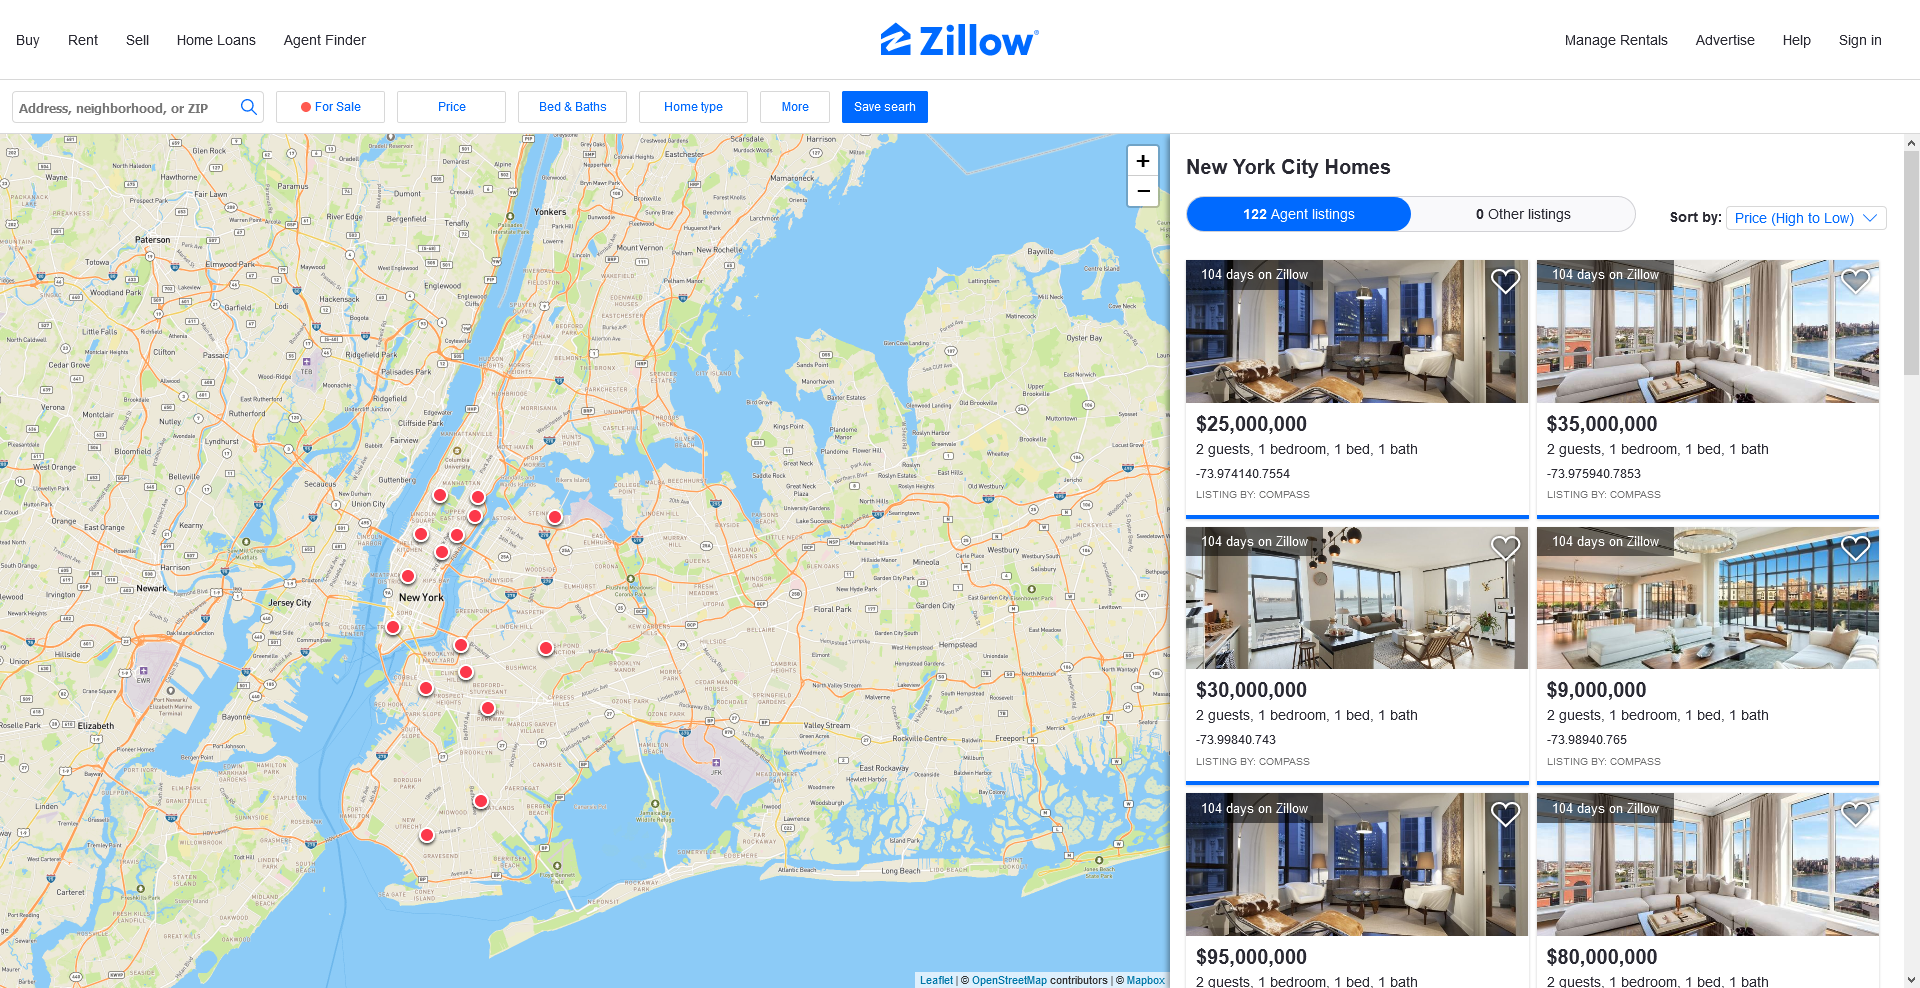 UI clone of Zillow's main page.